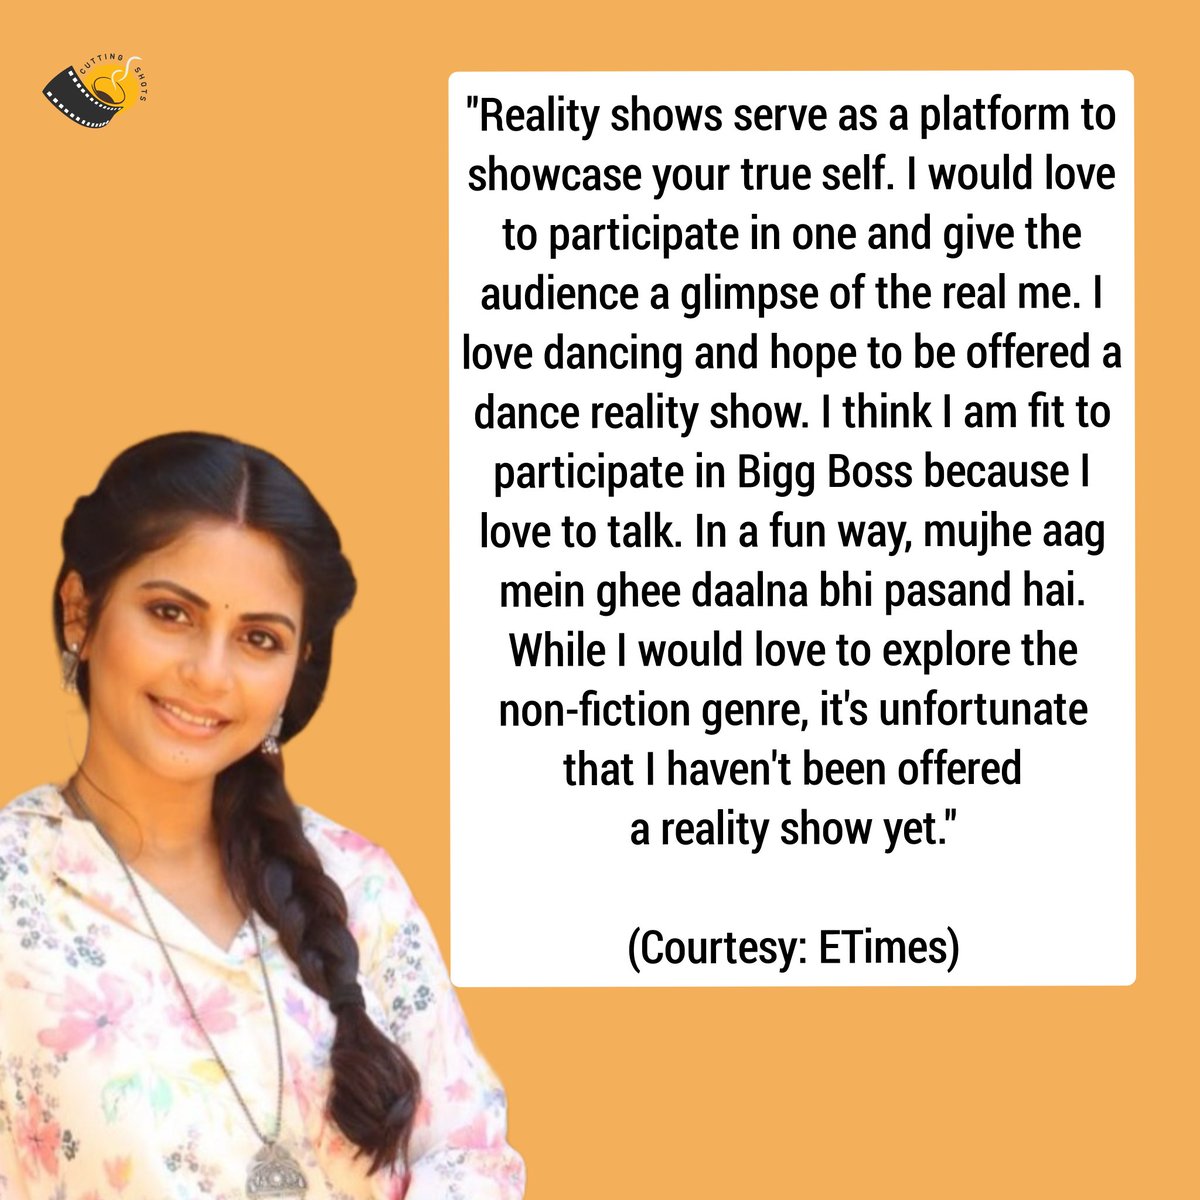 Megha Chakraborty of 'Imlie' fame said that she would love to explore the reality show genre.

#MeghaChakraborty #imlie #television #cuttingshots